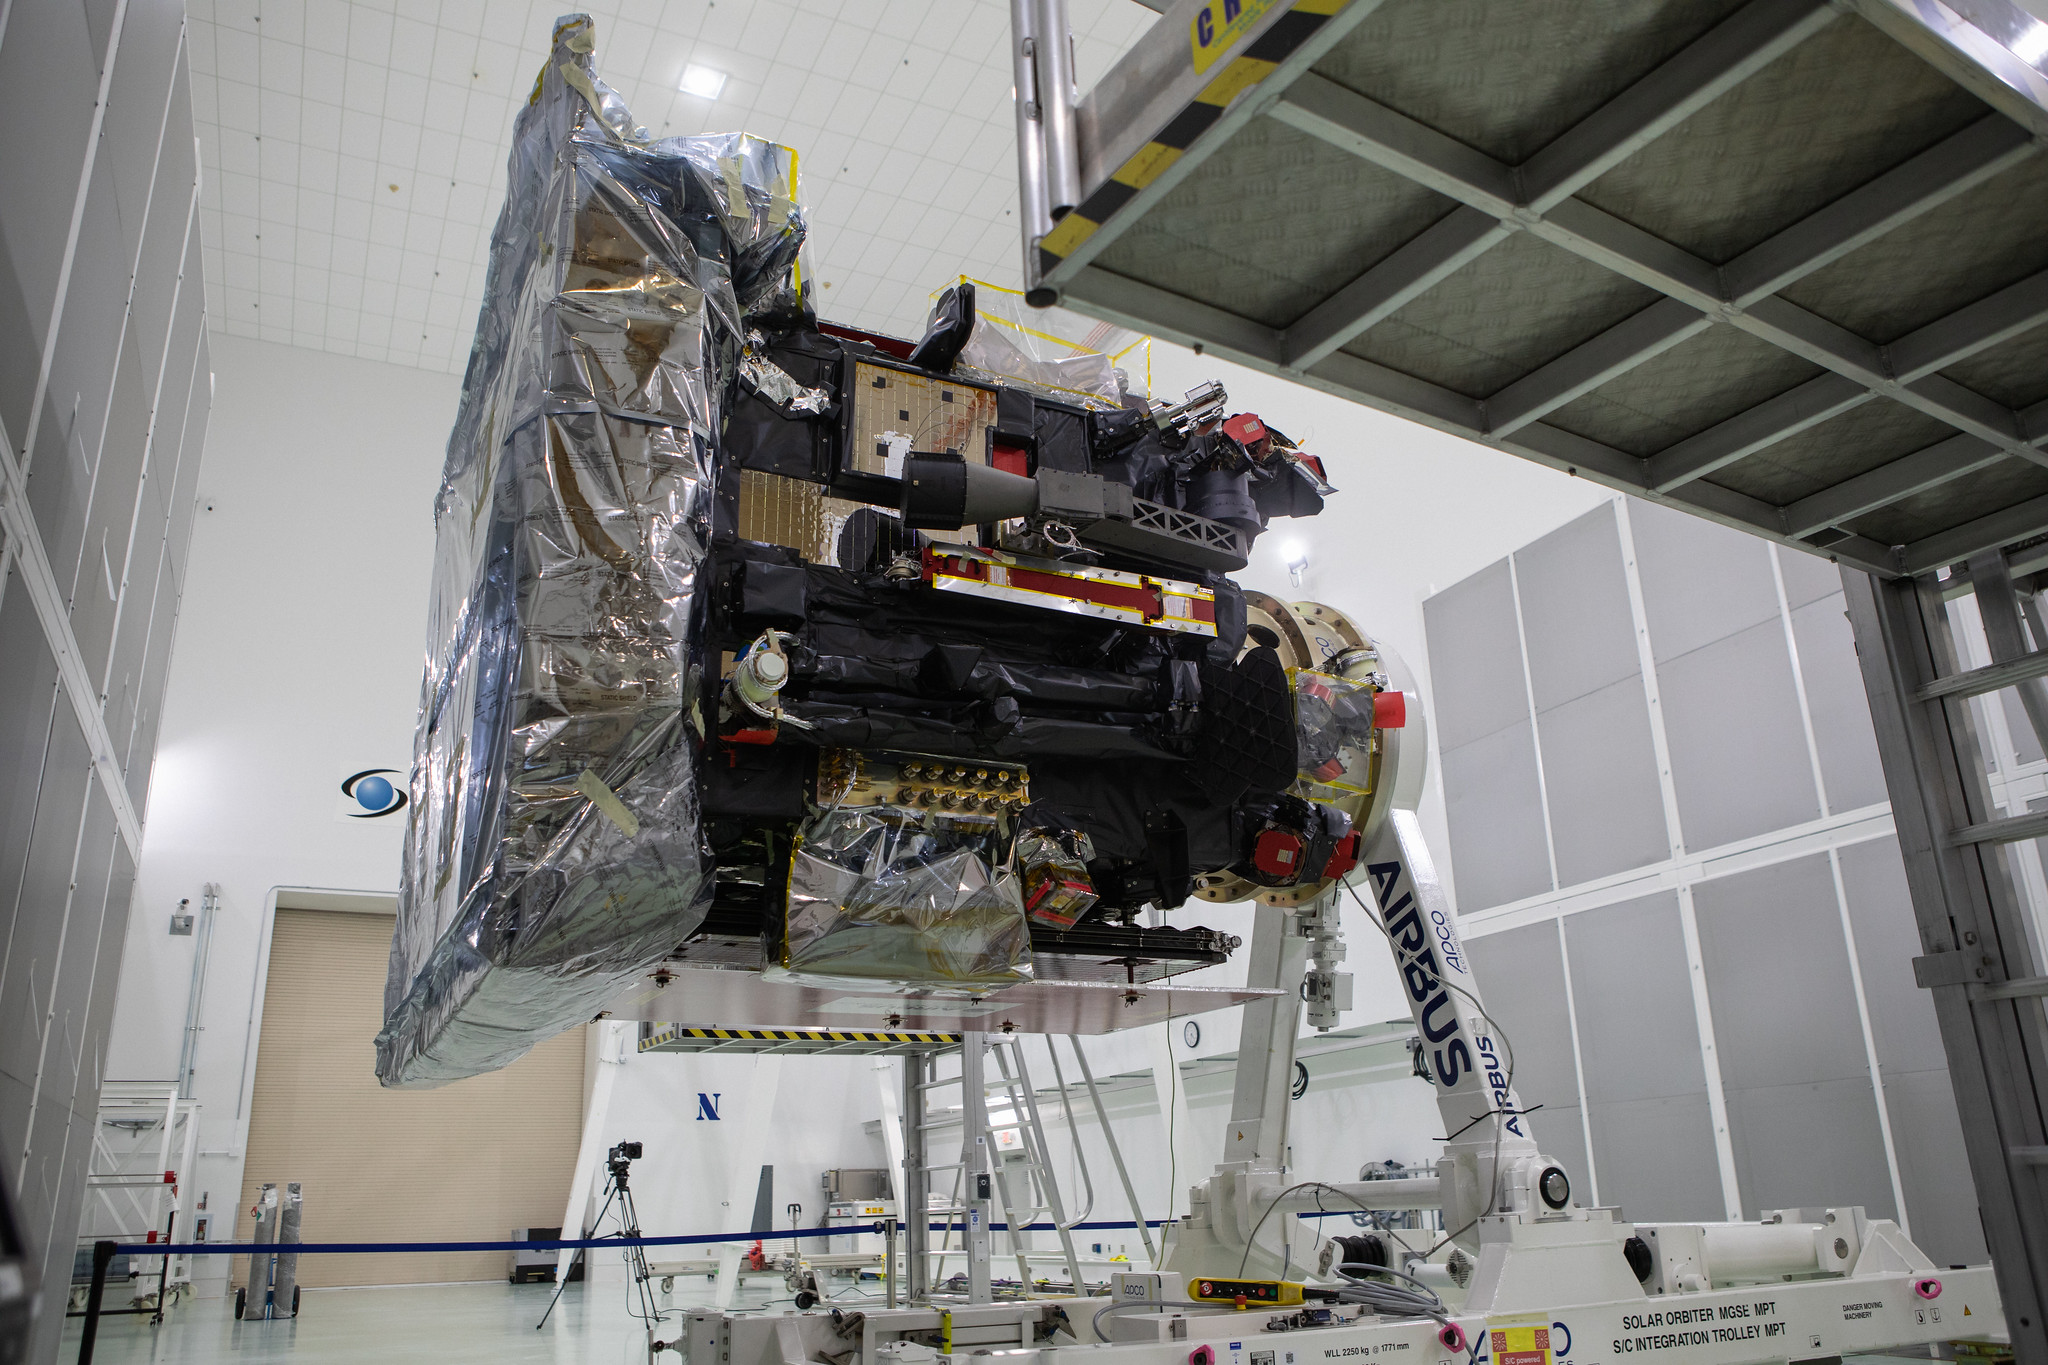 At Astrotech Space Operations in Titusville, Florida, the Solar Orbiter spacecraft was removed from its shipping container.